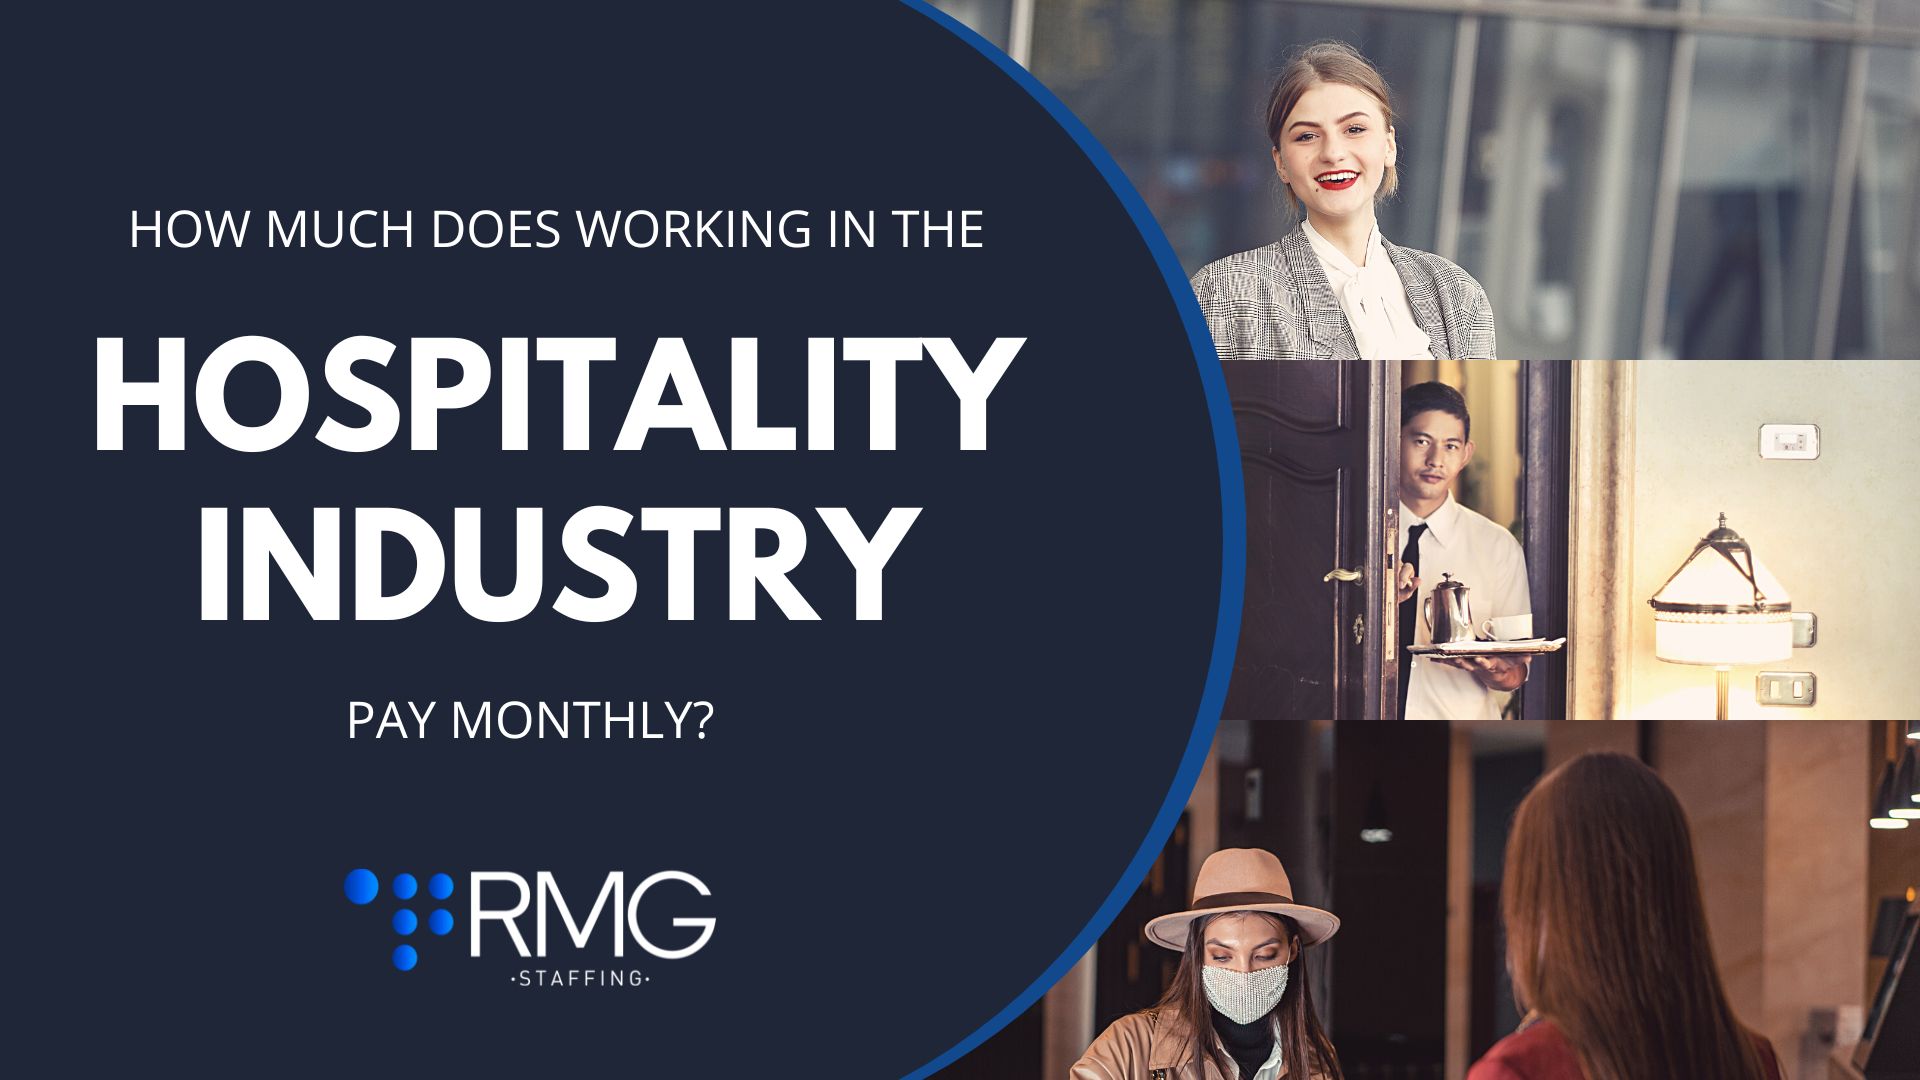 How much does working in the hospitality industry pay monthly-How much the hospitality industry pays monthly-RMG Staffing